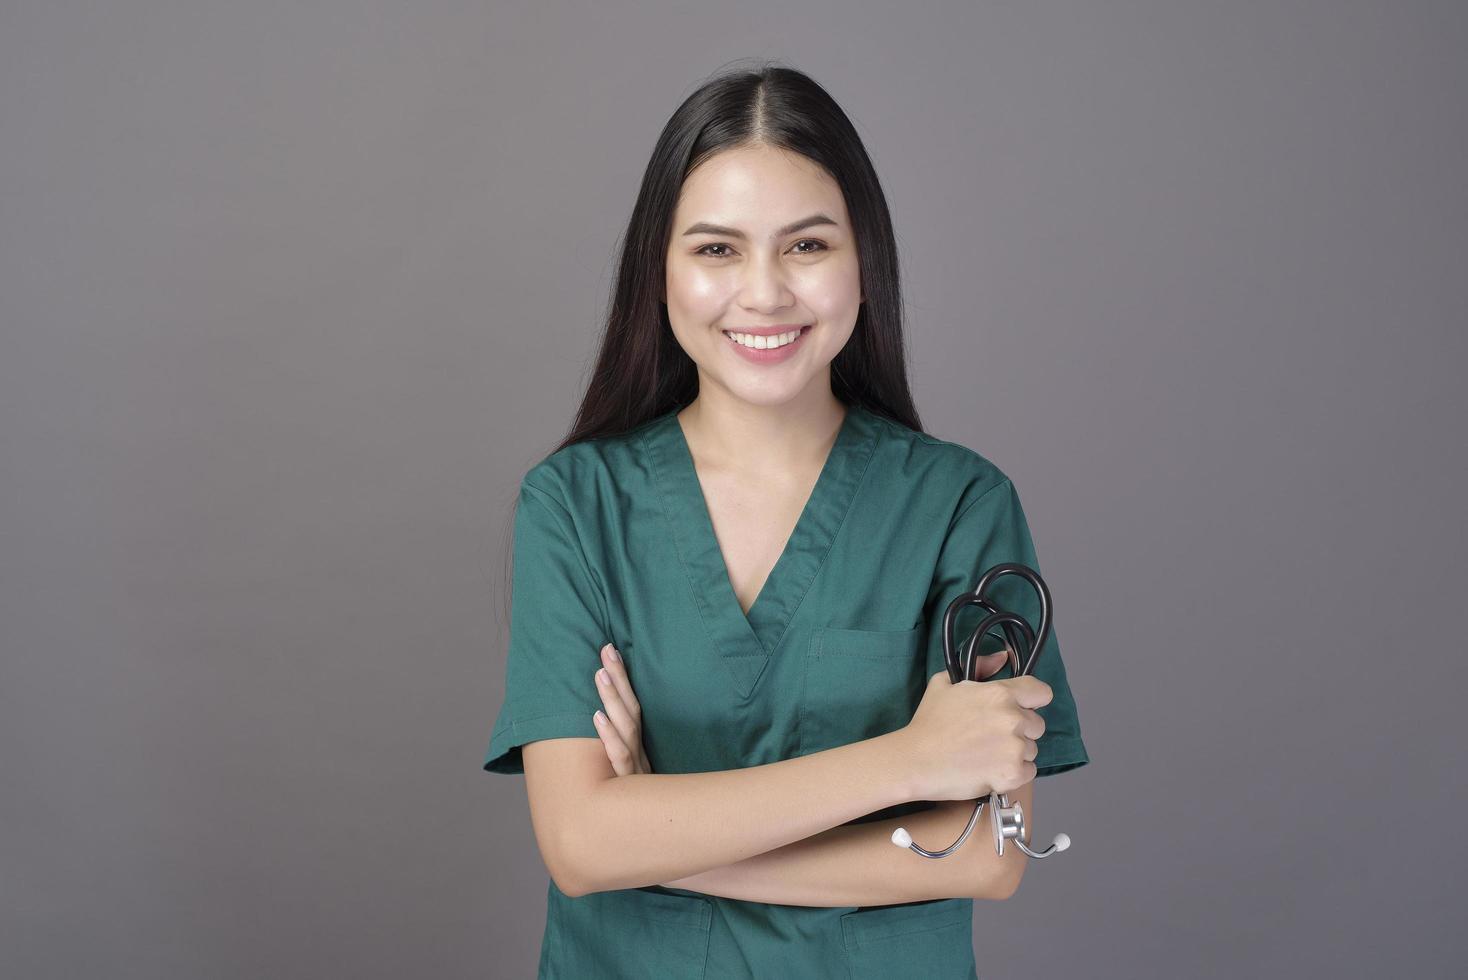 a female doctor wearing a green scrubs and stethoscope is on grey background studio photo